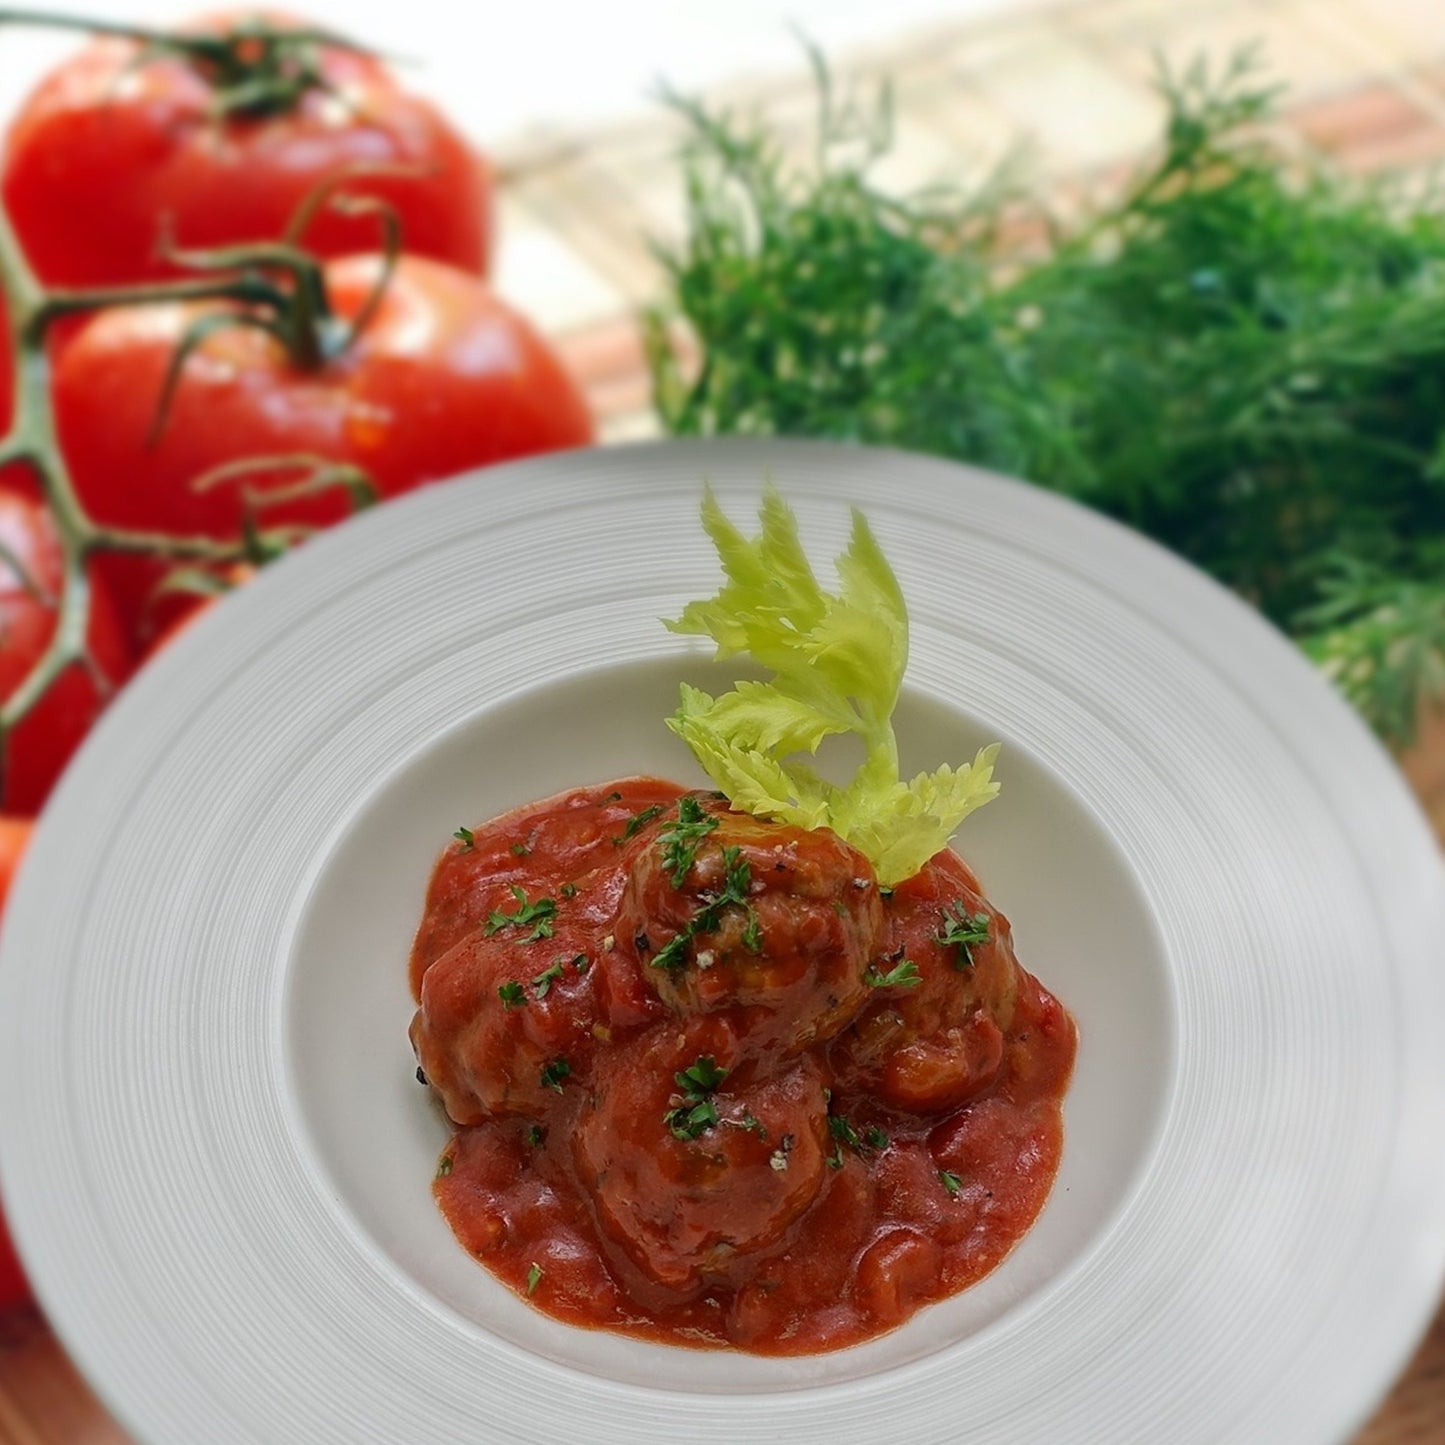 Beef Meatballs with Tomato Sauce (1kg)